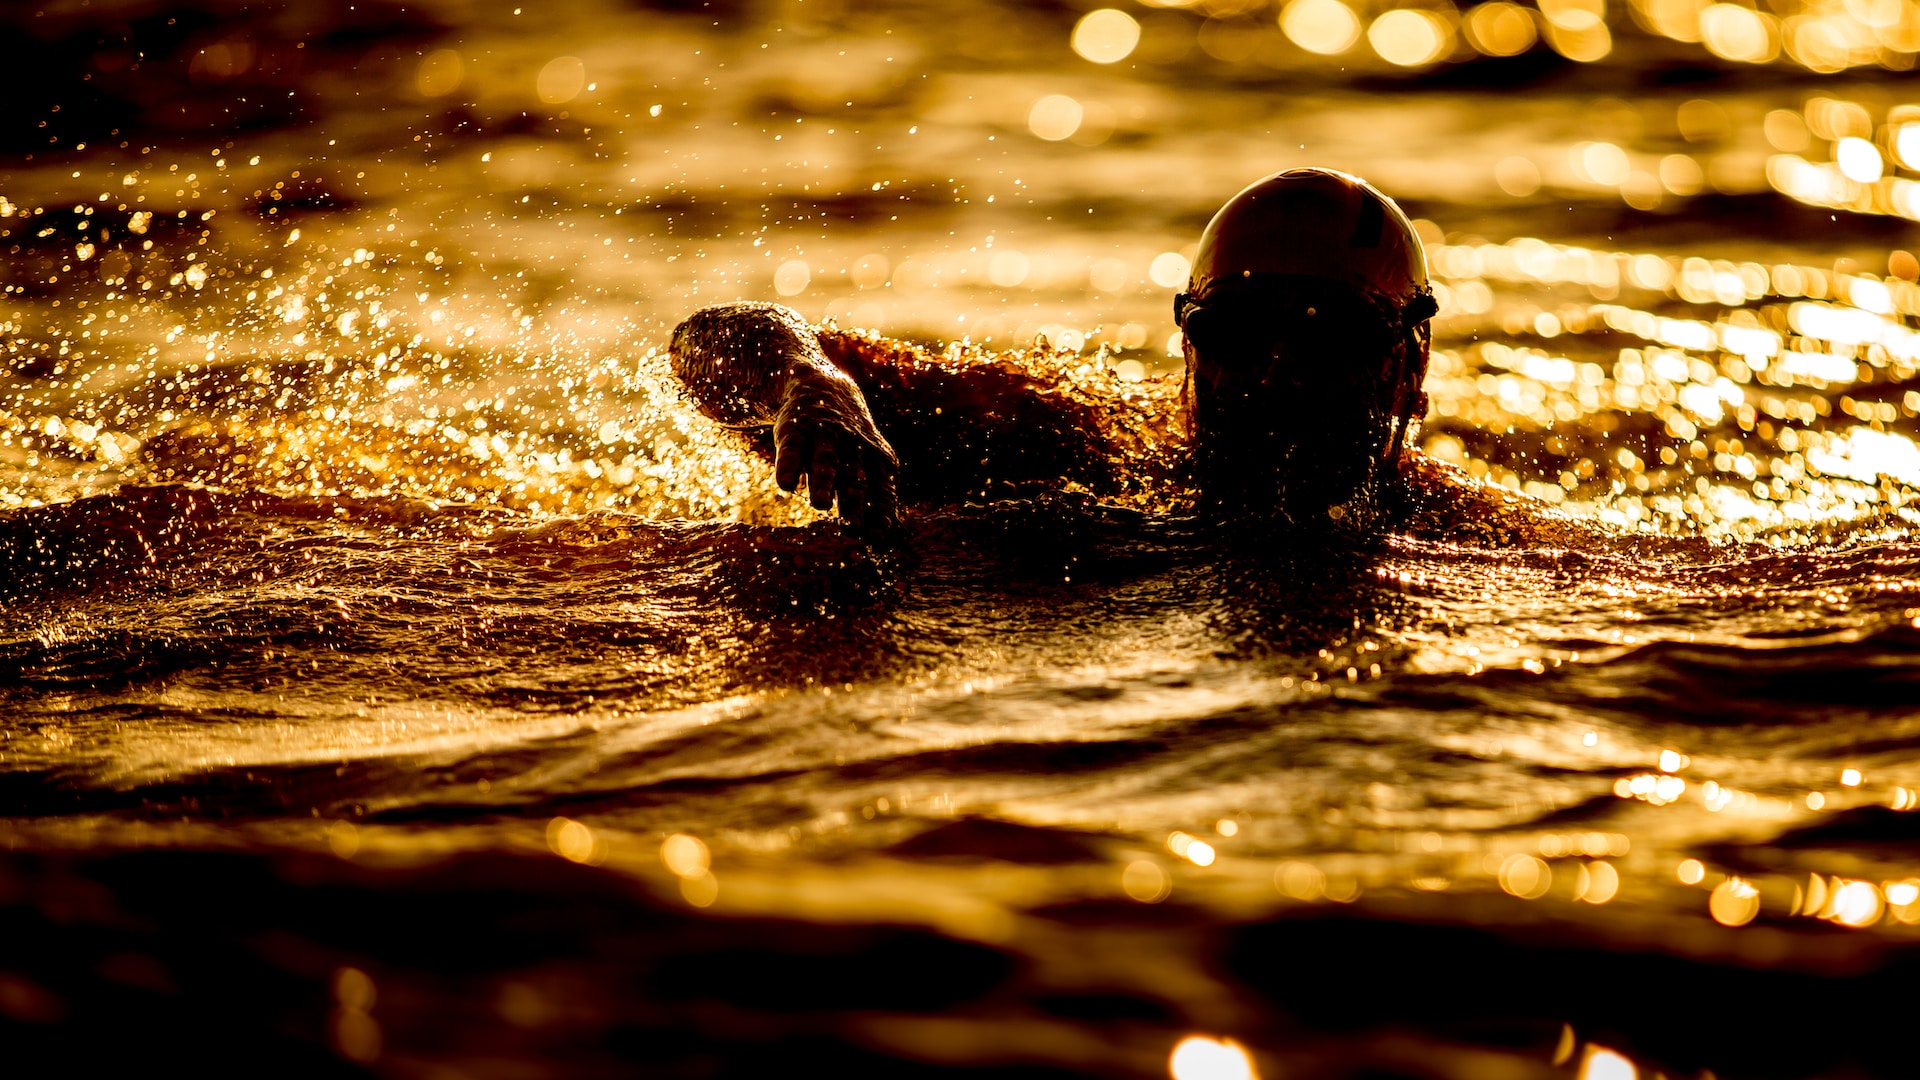 the image shows a man at the swimming race